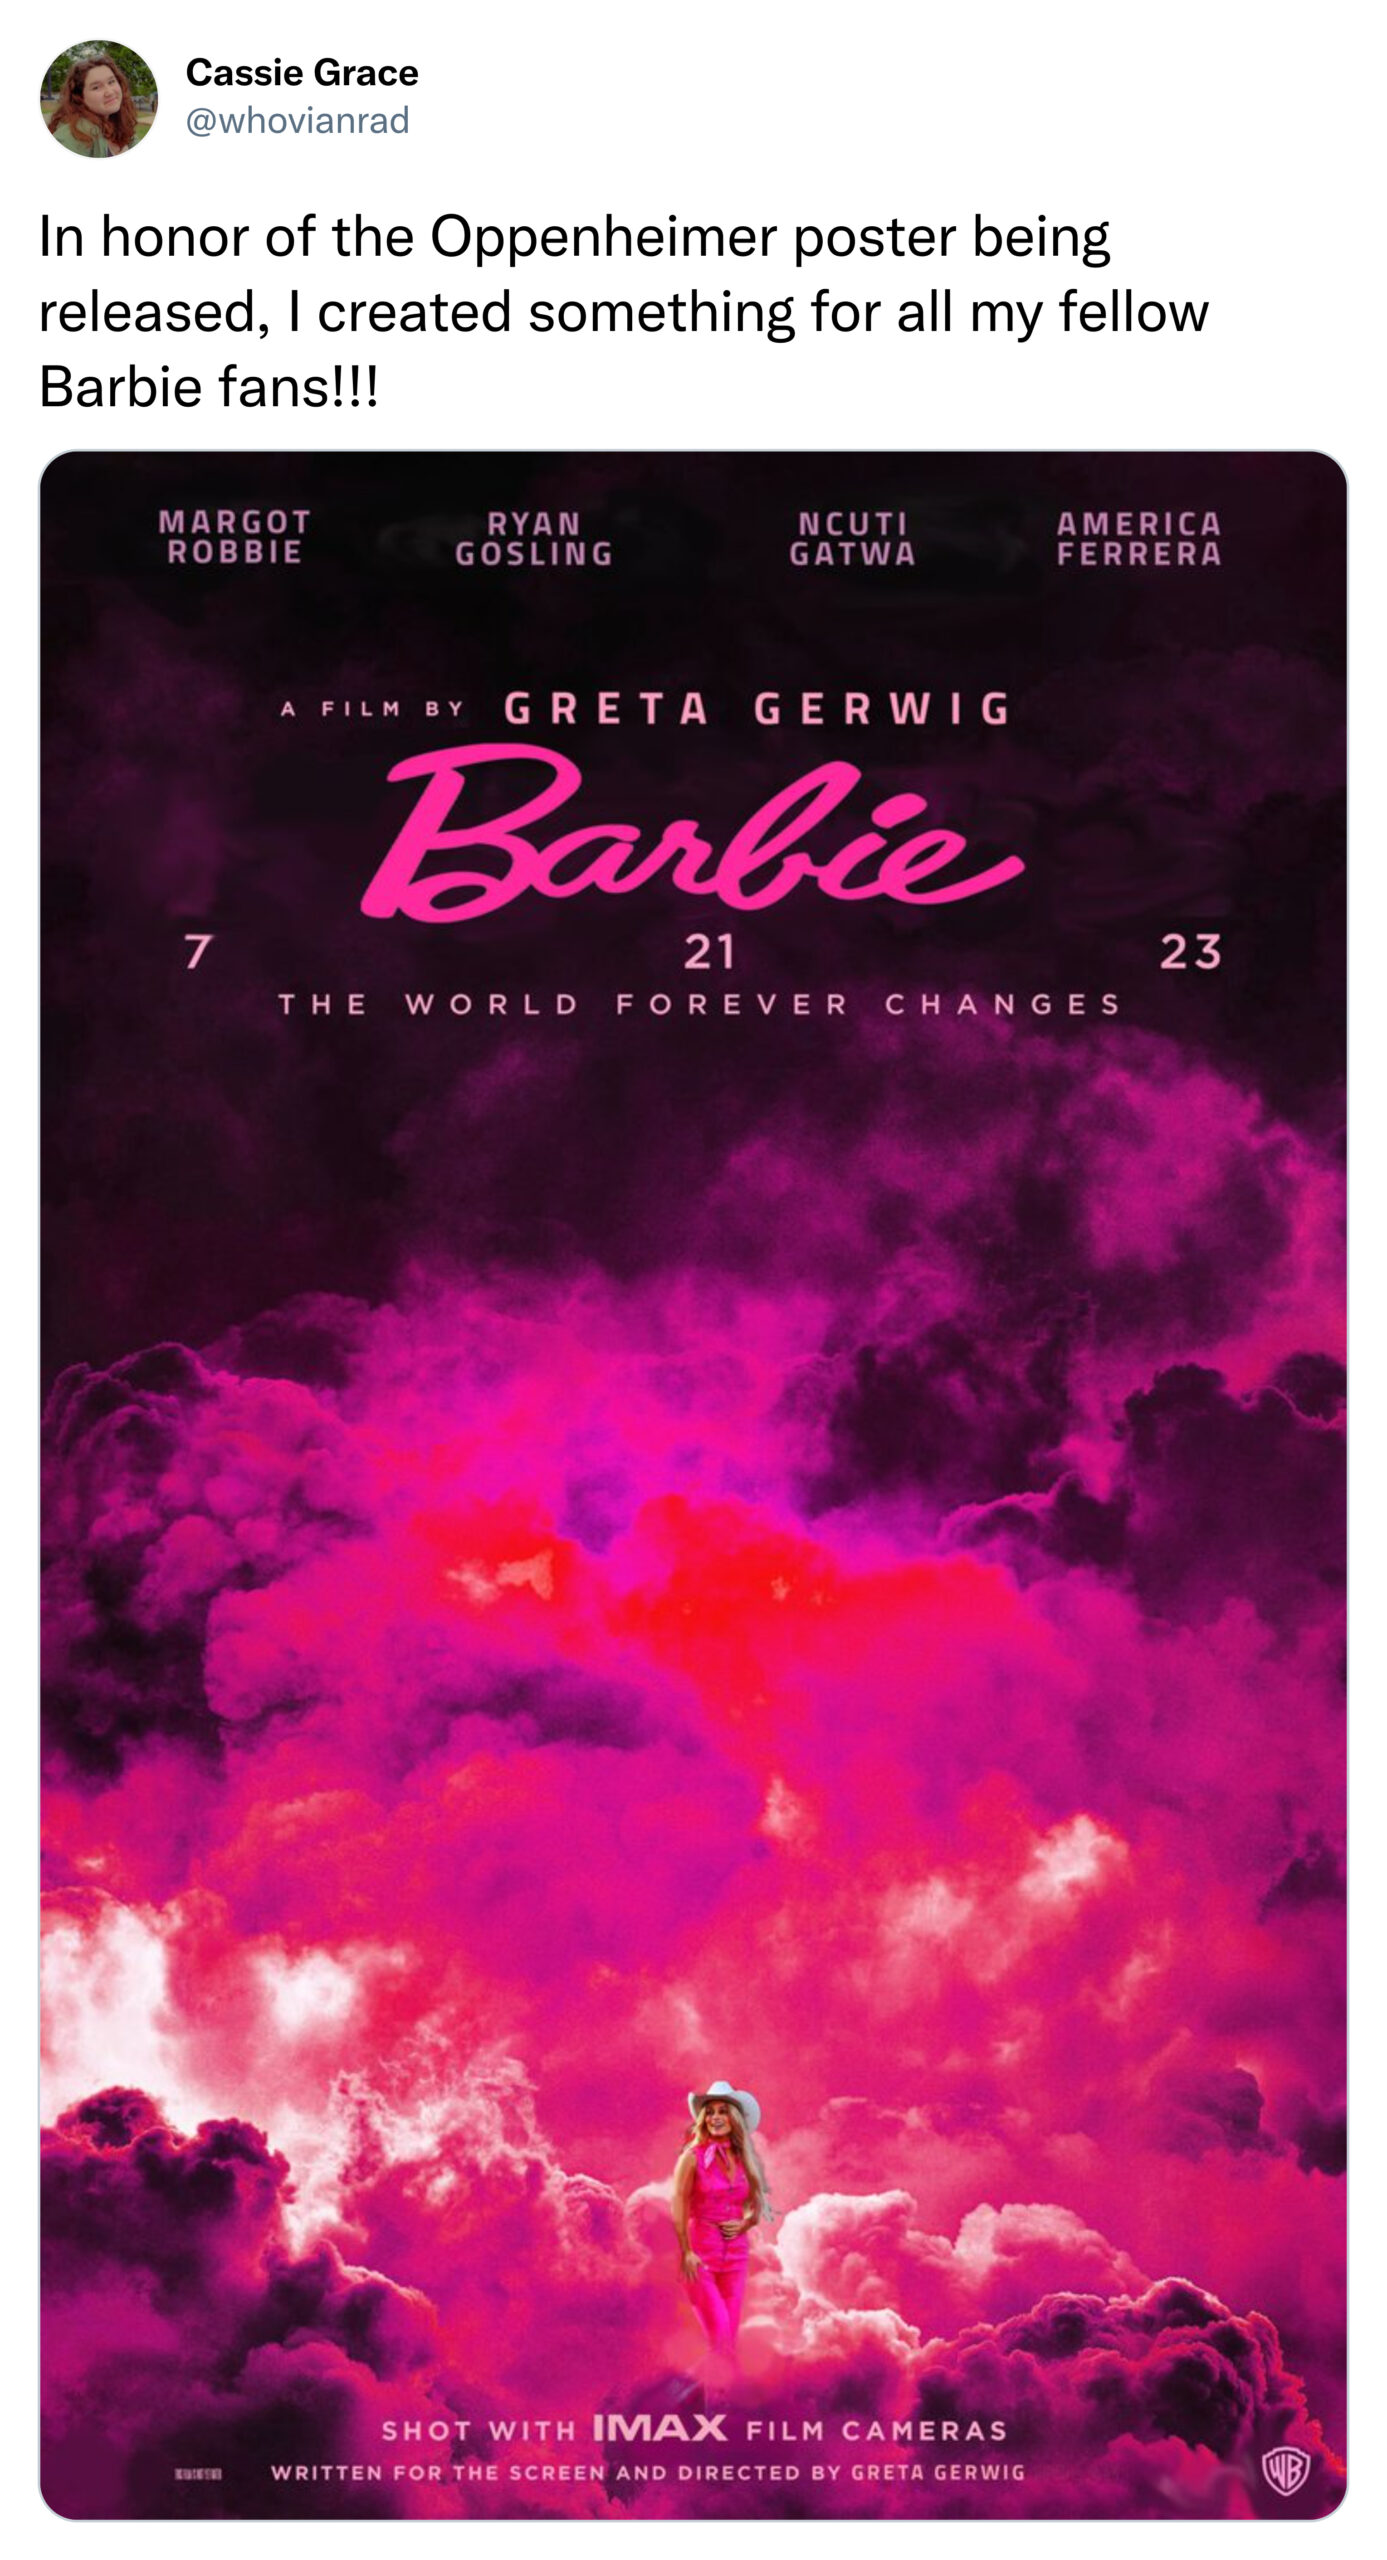 funny tweets and posts on twitter -  barbie market - Cassie Grace In honor of the Oppenheimer poster being released, I created something for all my fellow Barbie fans!!! Margot Robbie Ryan Gosling Ncuti Gatwa America Ferrera Greta Gerwig Barbie 21 The Wor